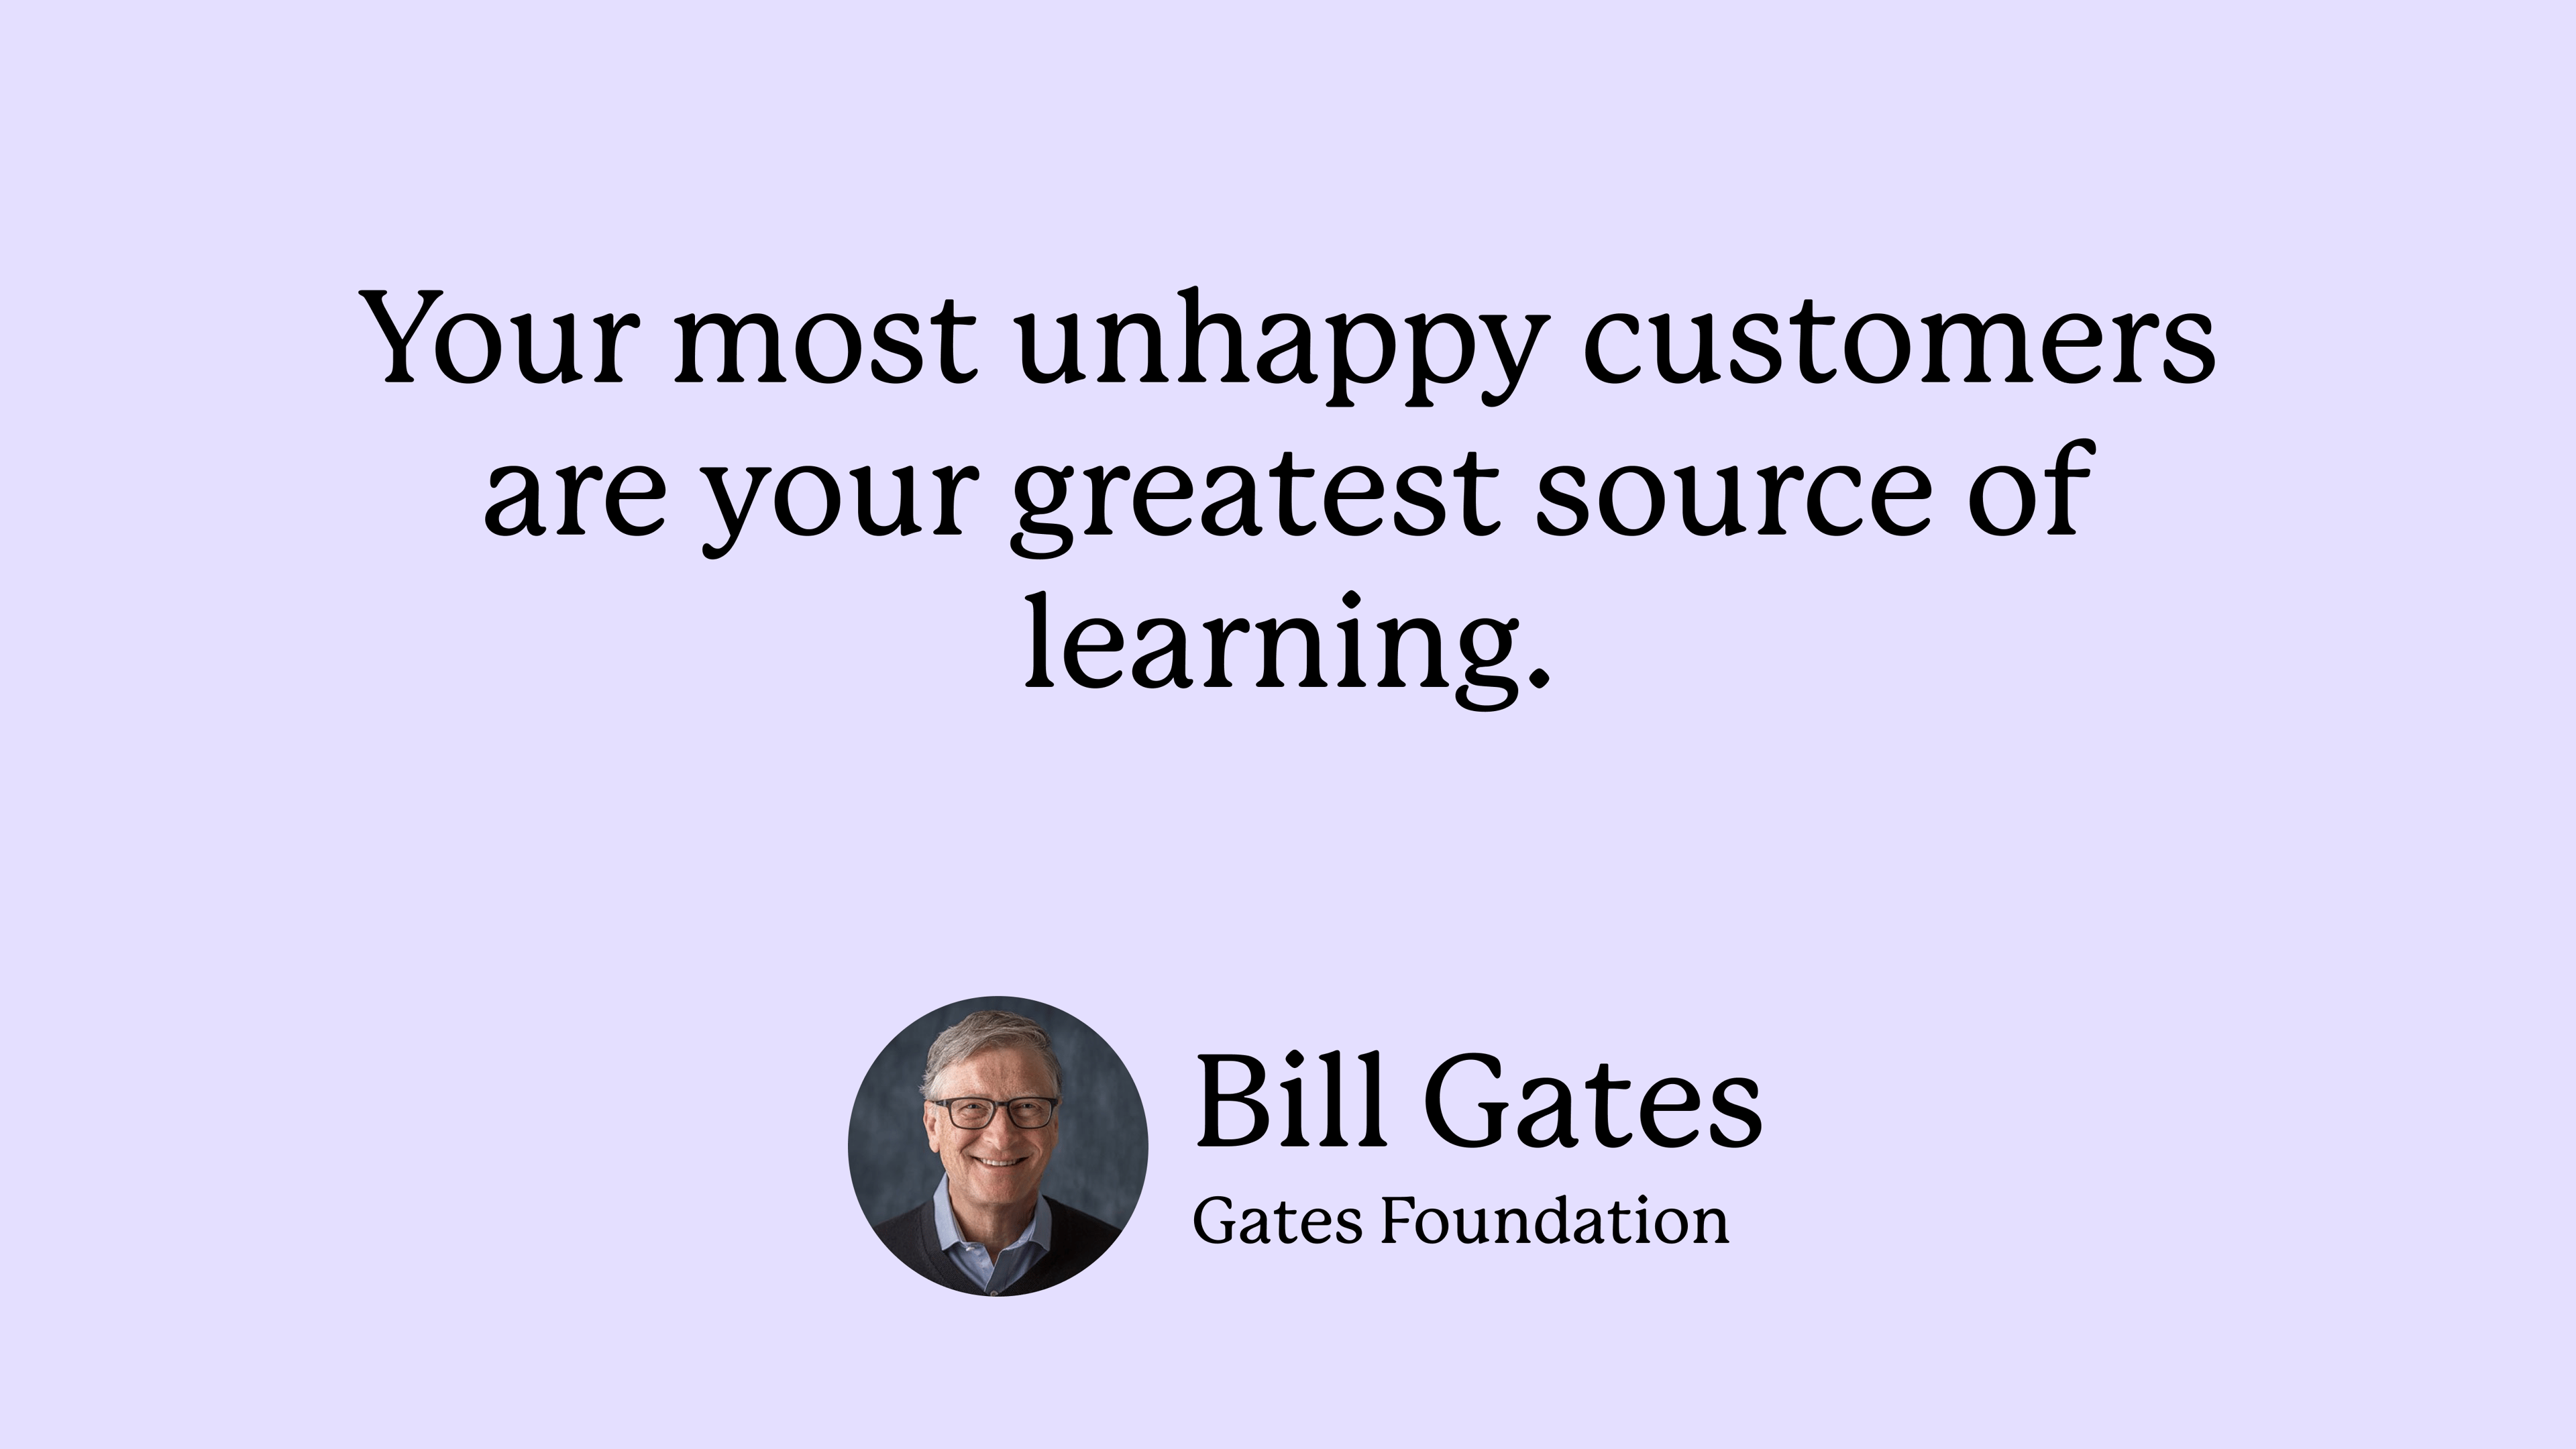 Bill Gates on Product Service Management